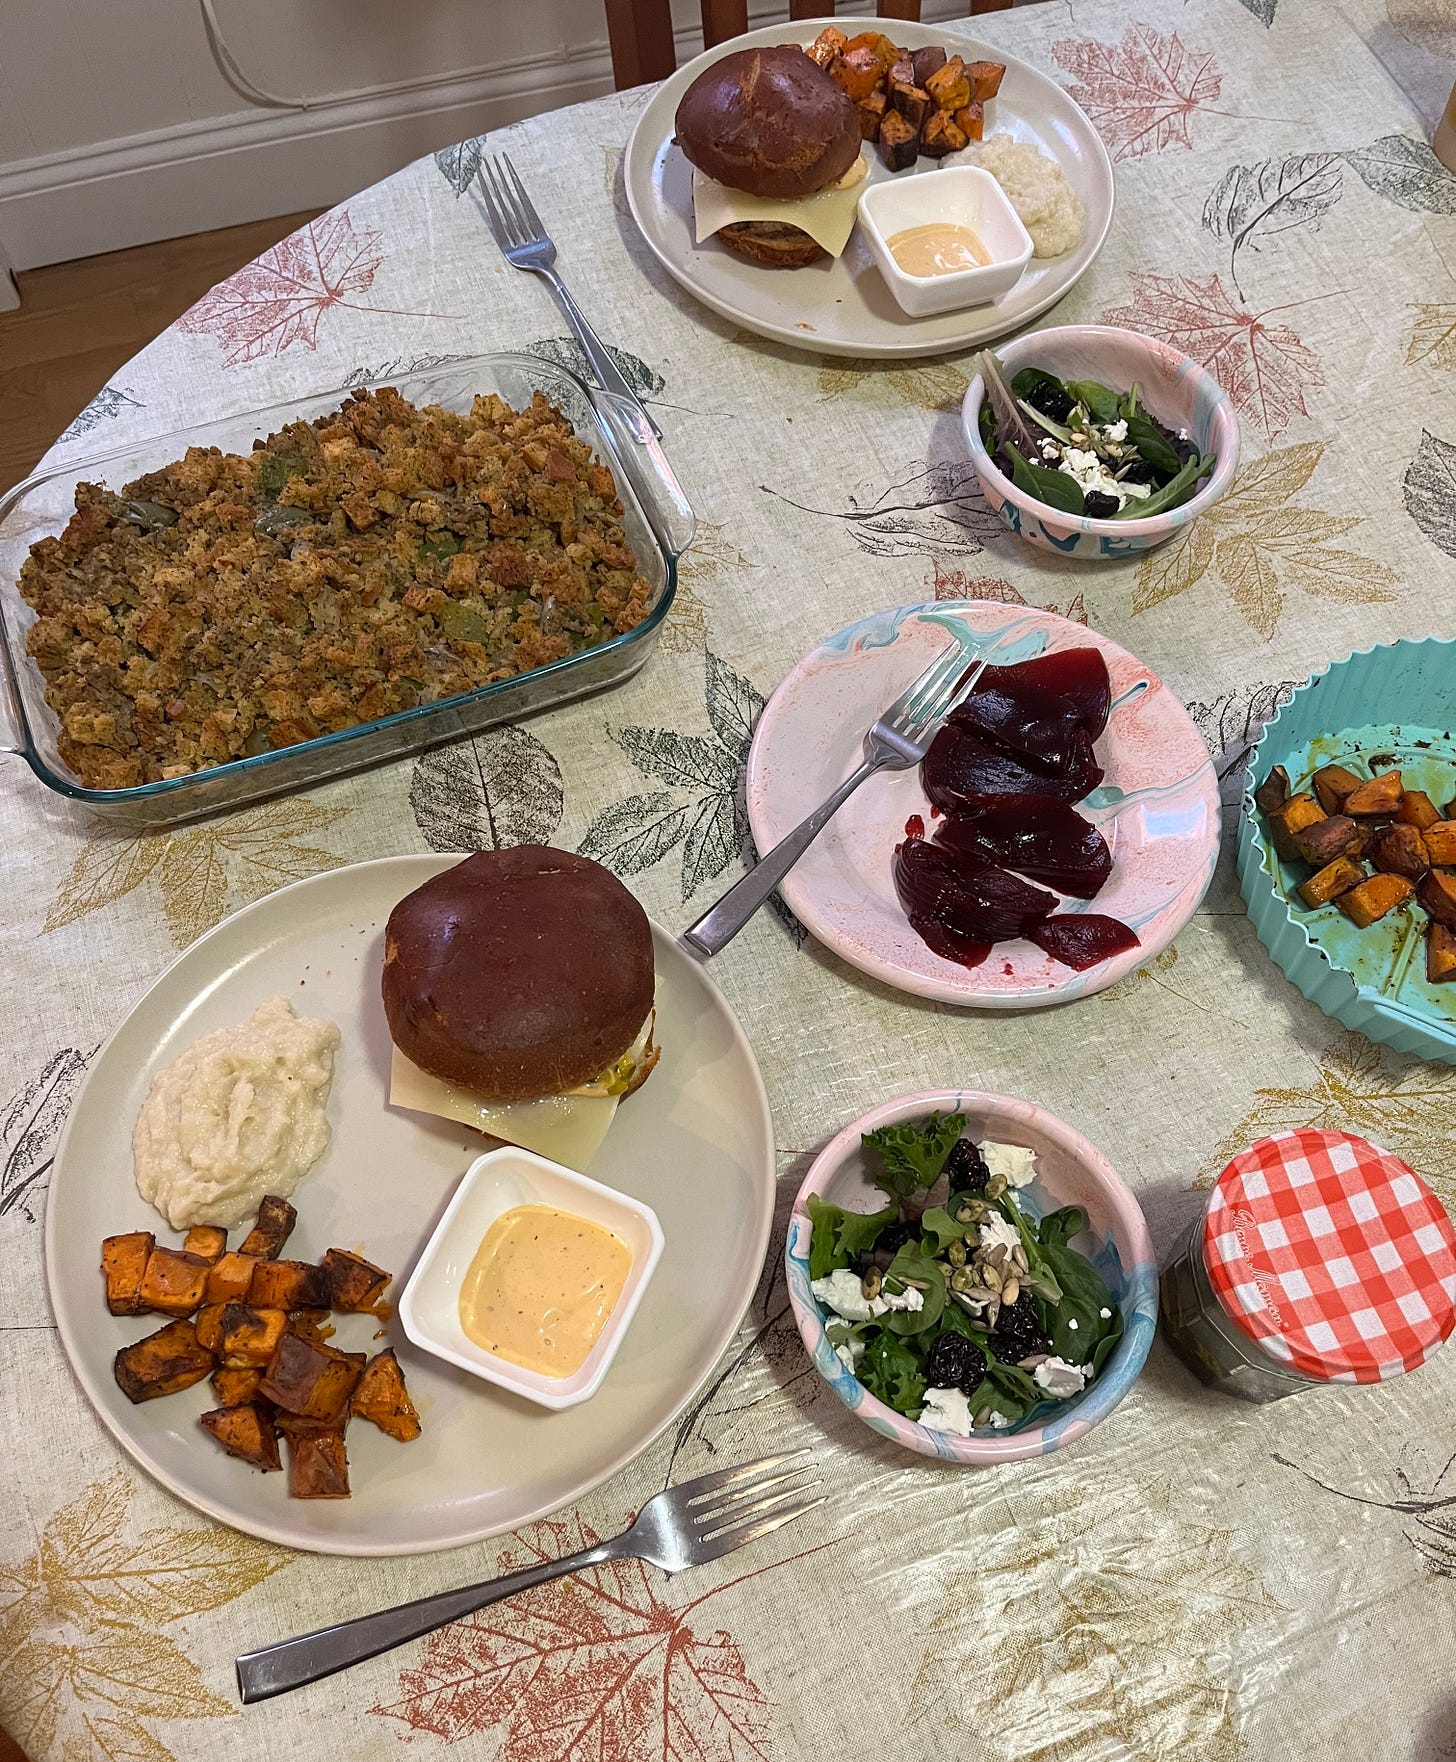 thanksgiving dinner of turkey burgers, sweet potatoes, stuffing, cranberry sauce, and salad